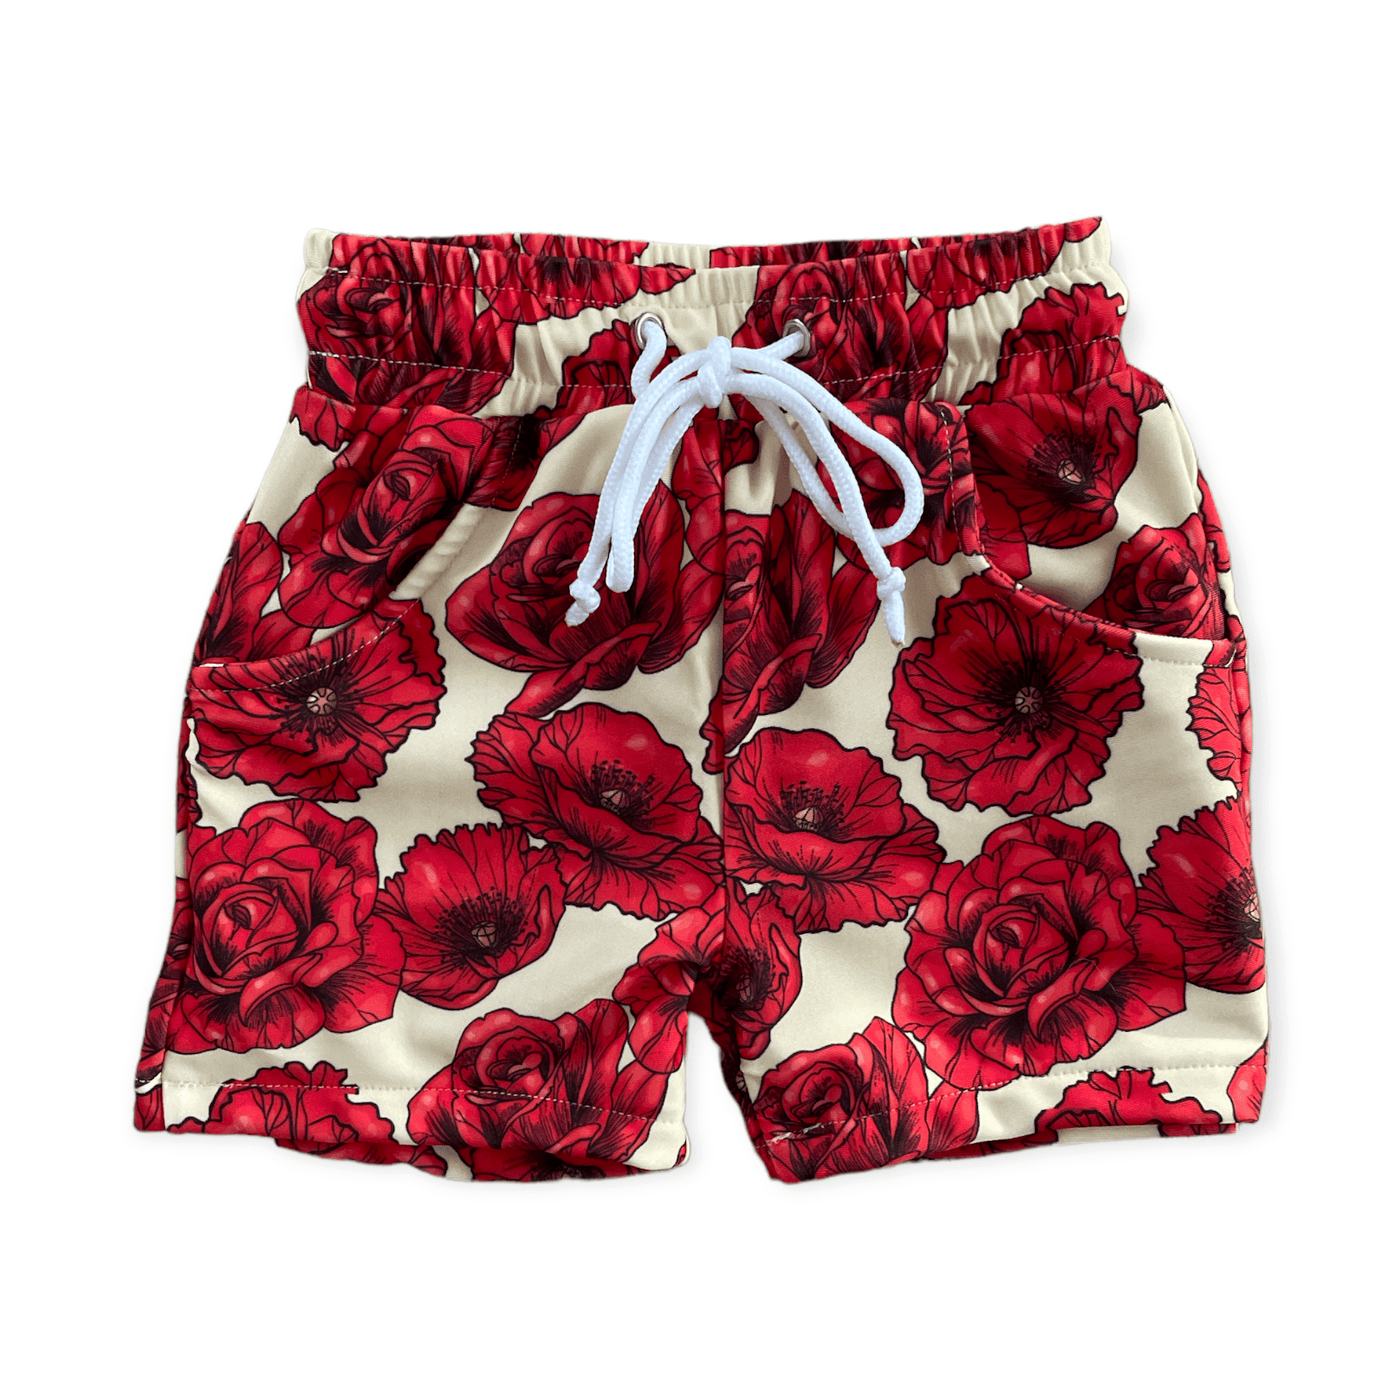 Best Day Ever Kids Swim Trunk Perfectly Poppy Swim Trunk buy online boutique kids clothing